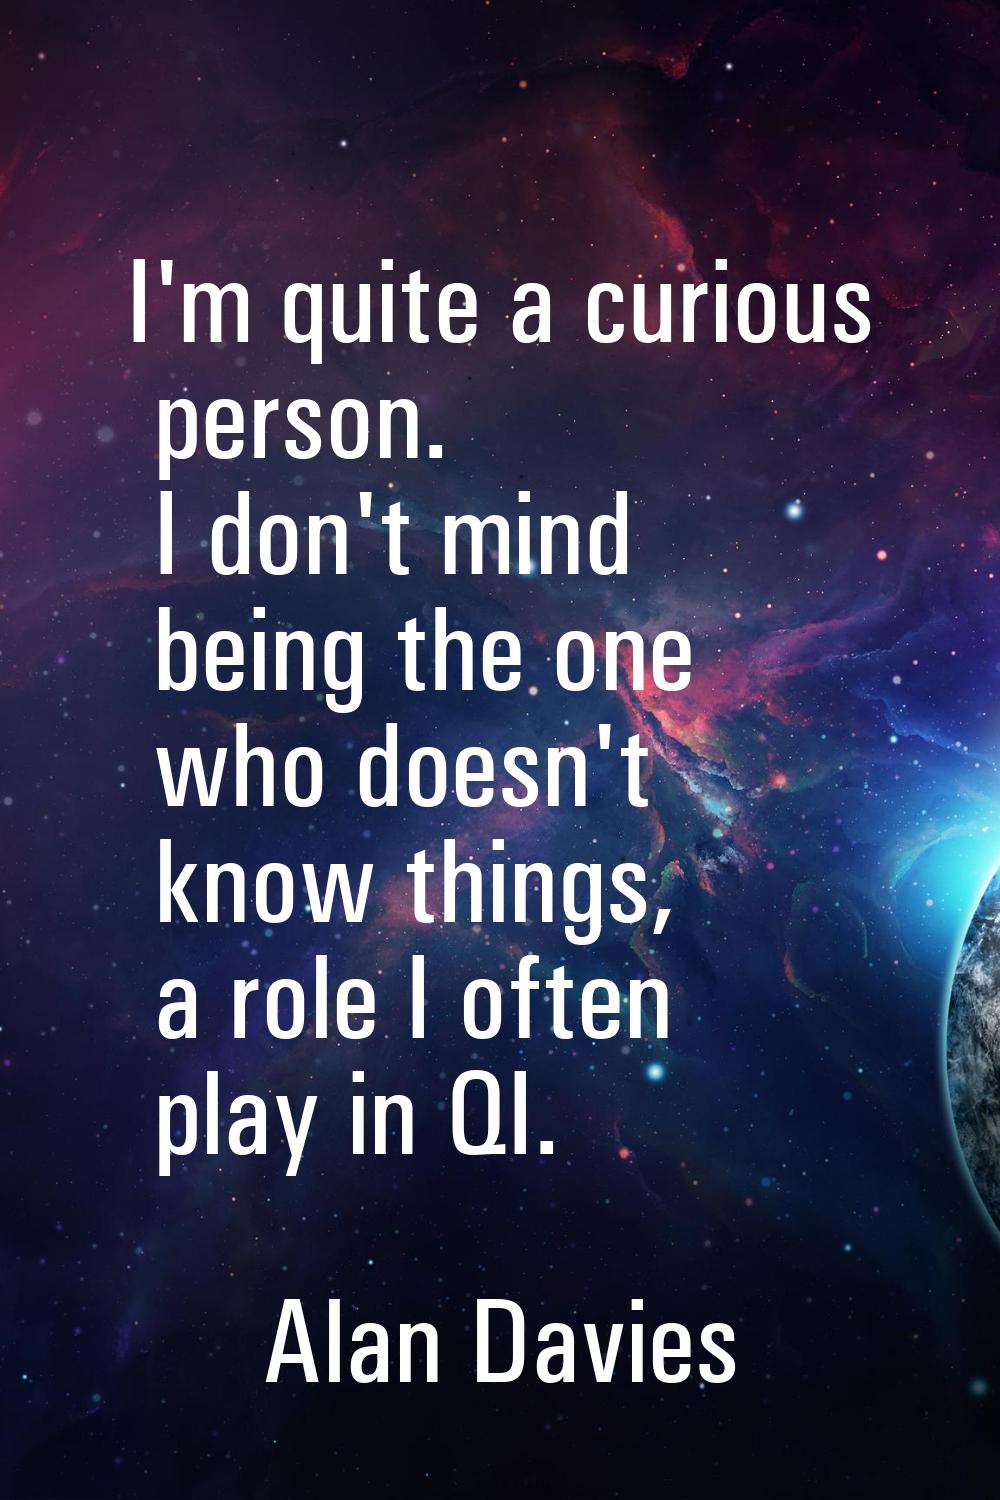 I'm quite a curious person. I don't mind being the one who doesn't know things, a role I often play